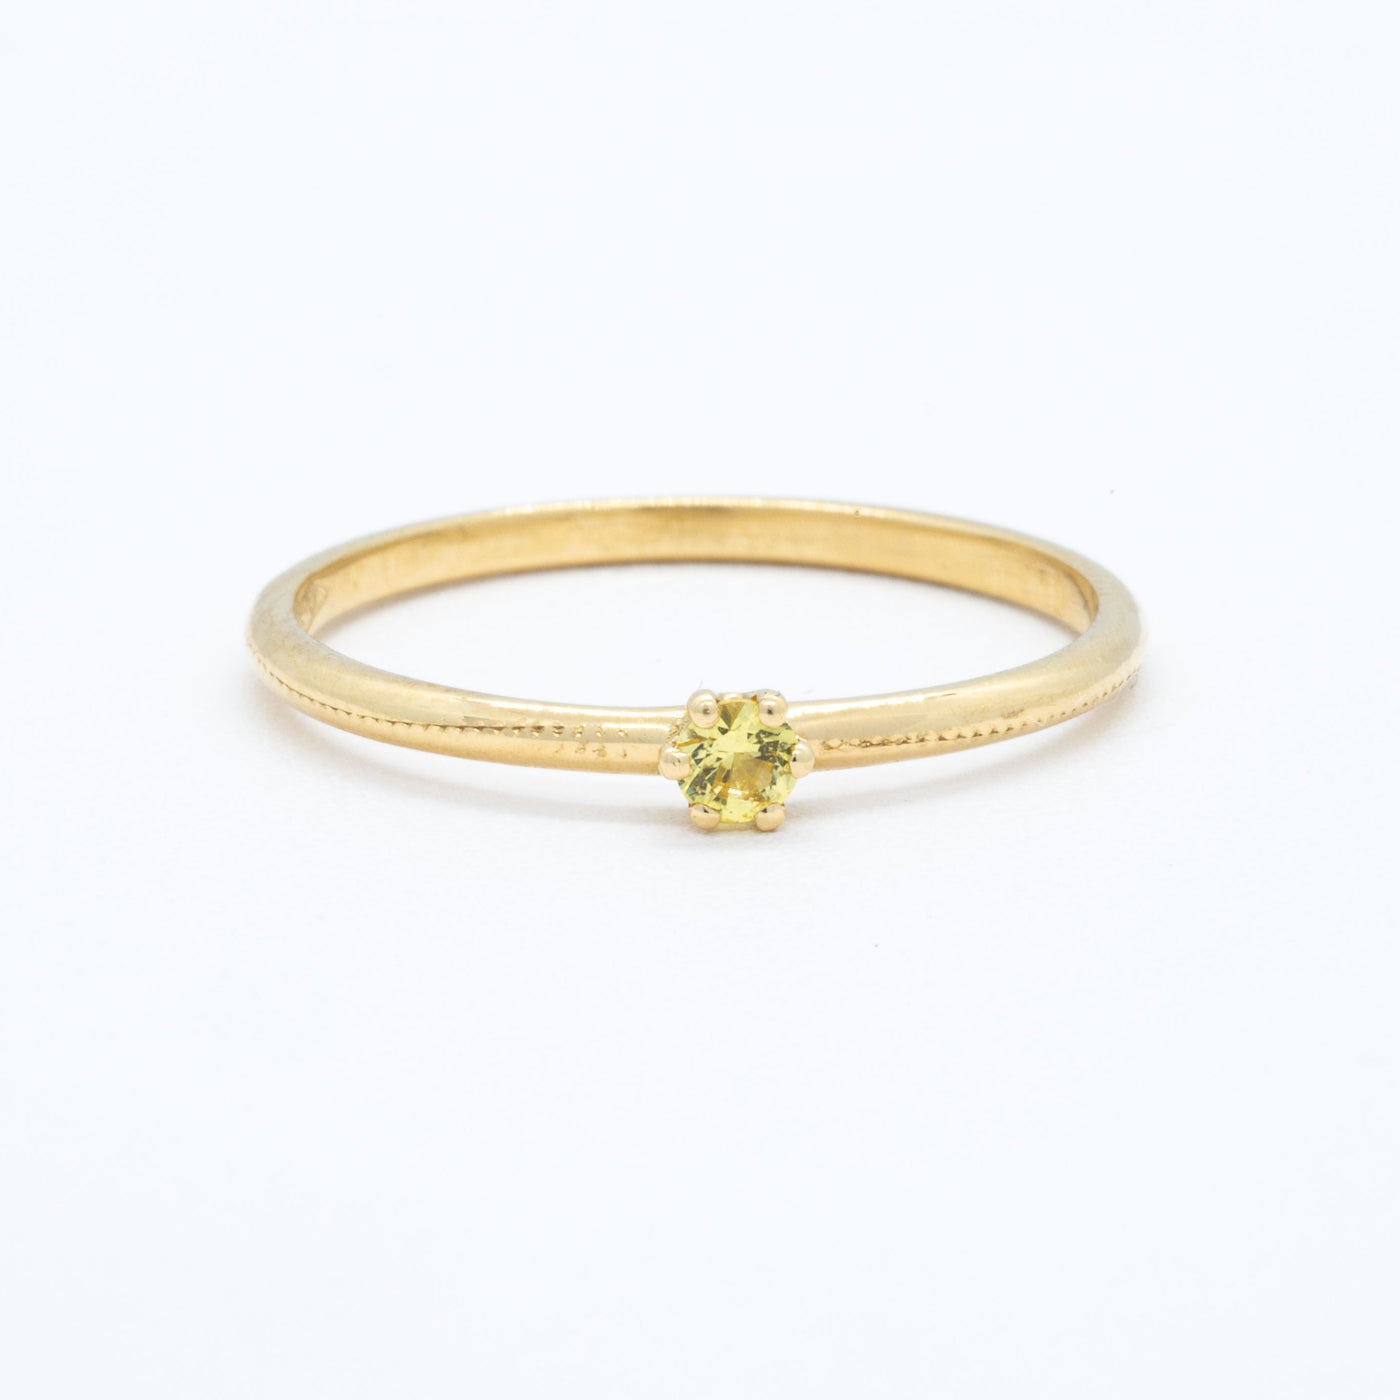 Recyled golden ring with a yellow sapphire labgrown gemstone by Juna Fae